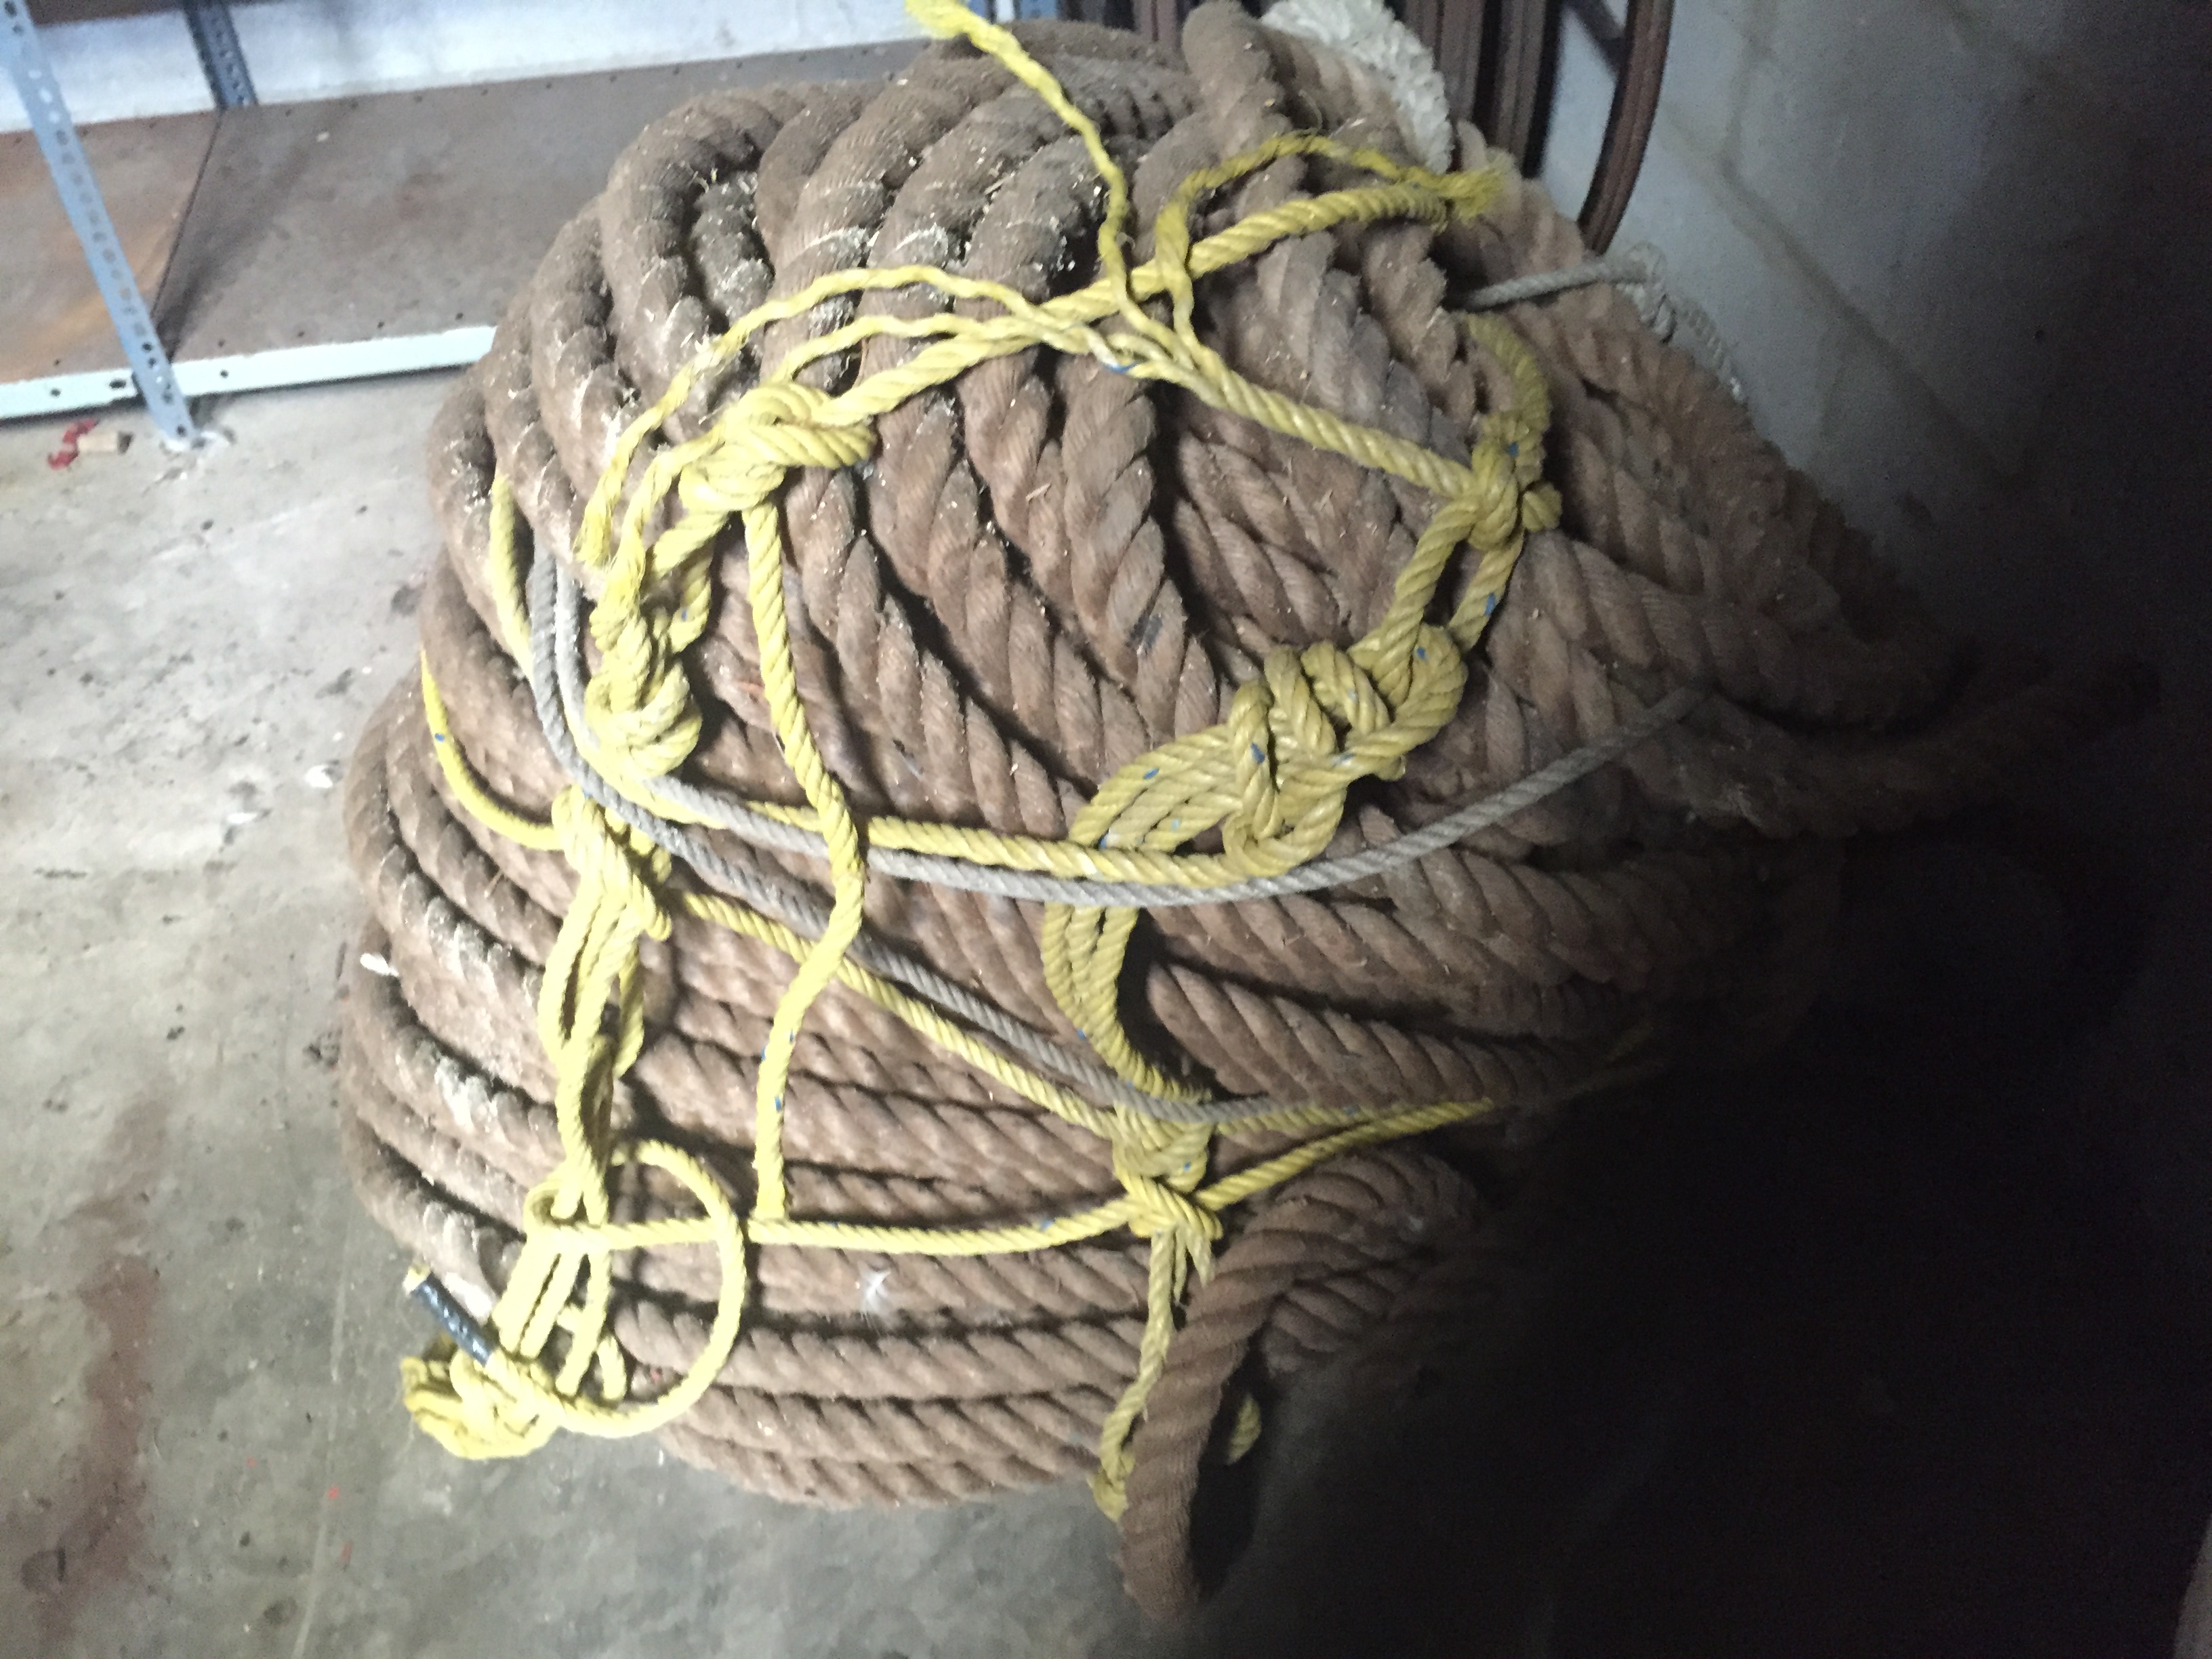 A coil of rope.